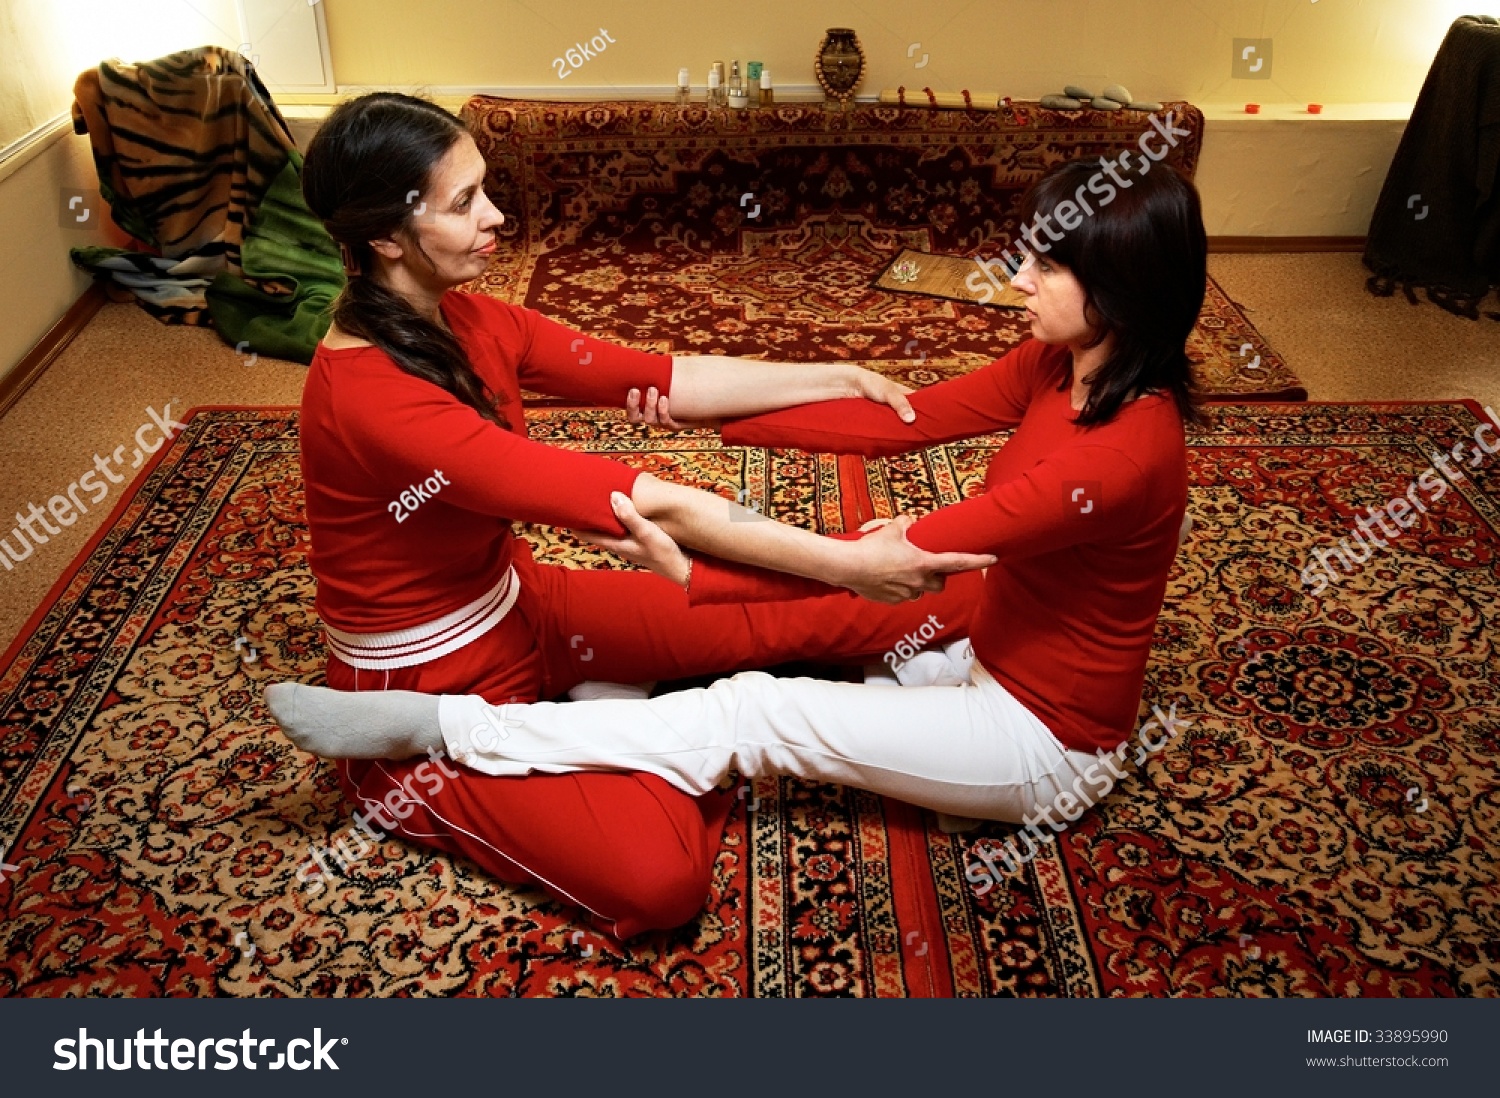 Thai Massage Is A Type Of Massage In Thai Style That Involves ...